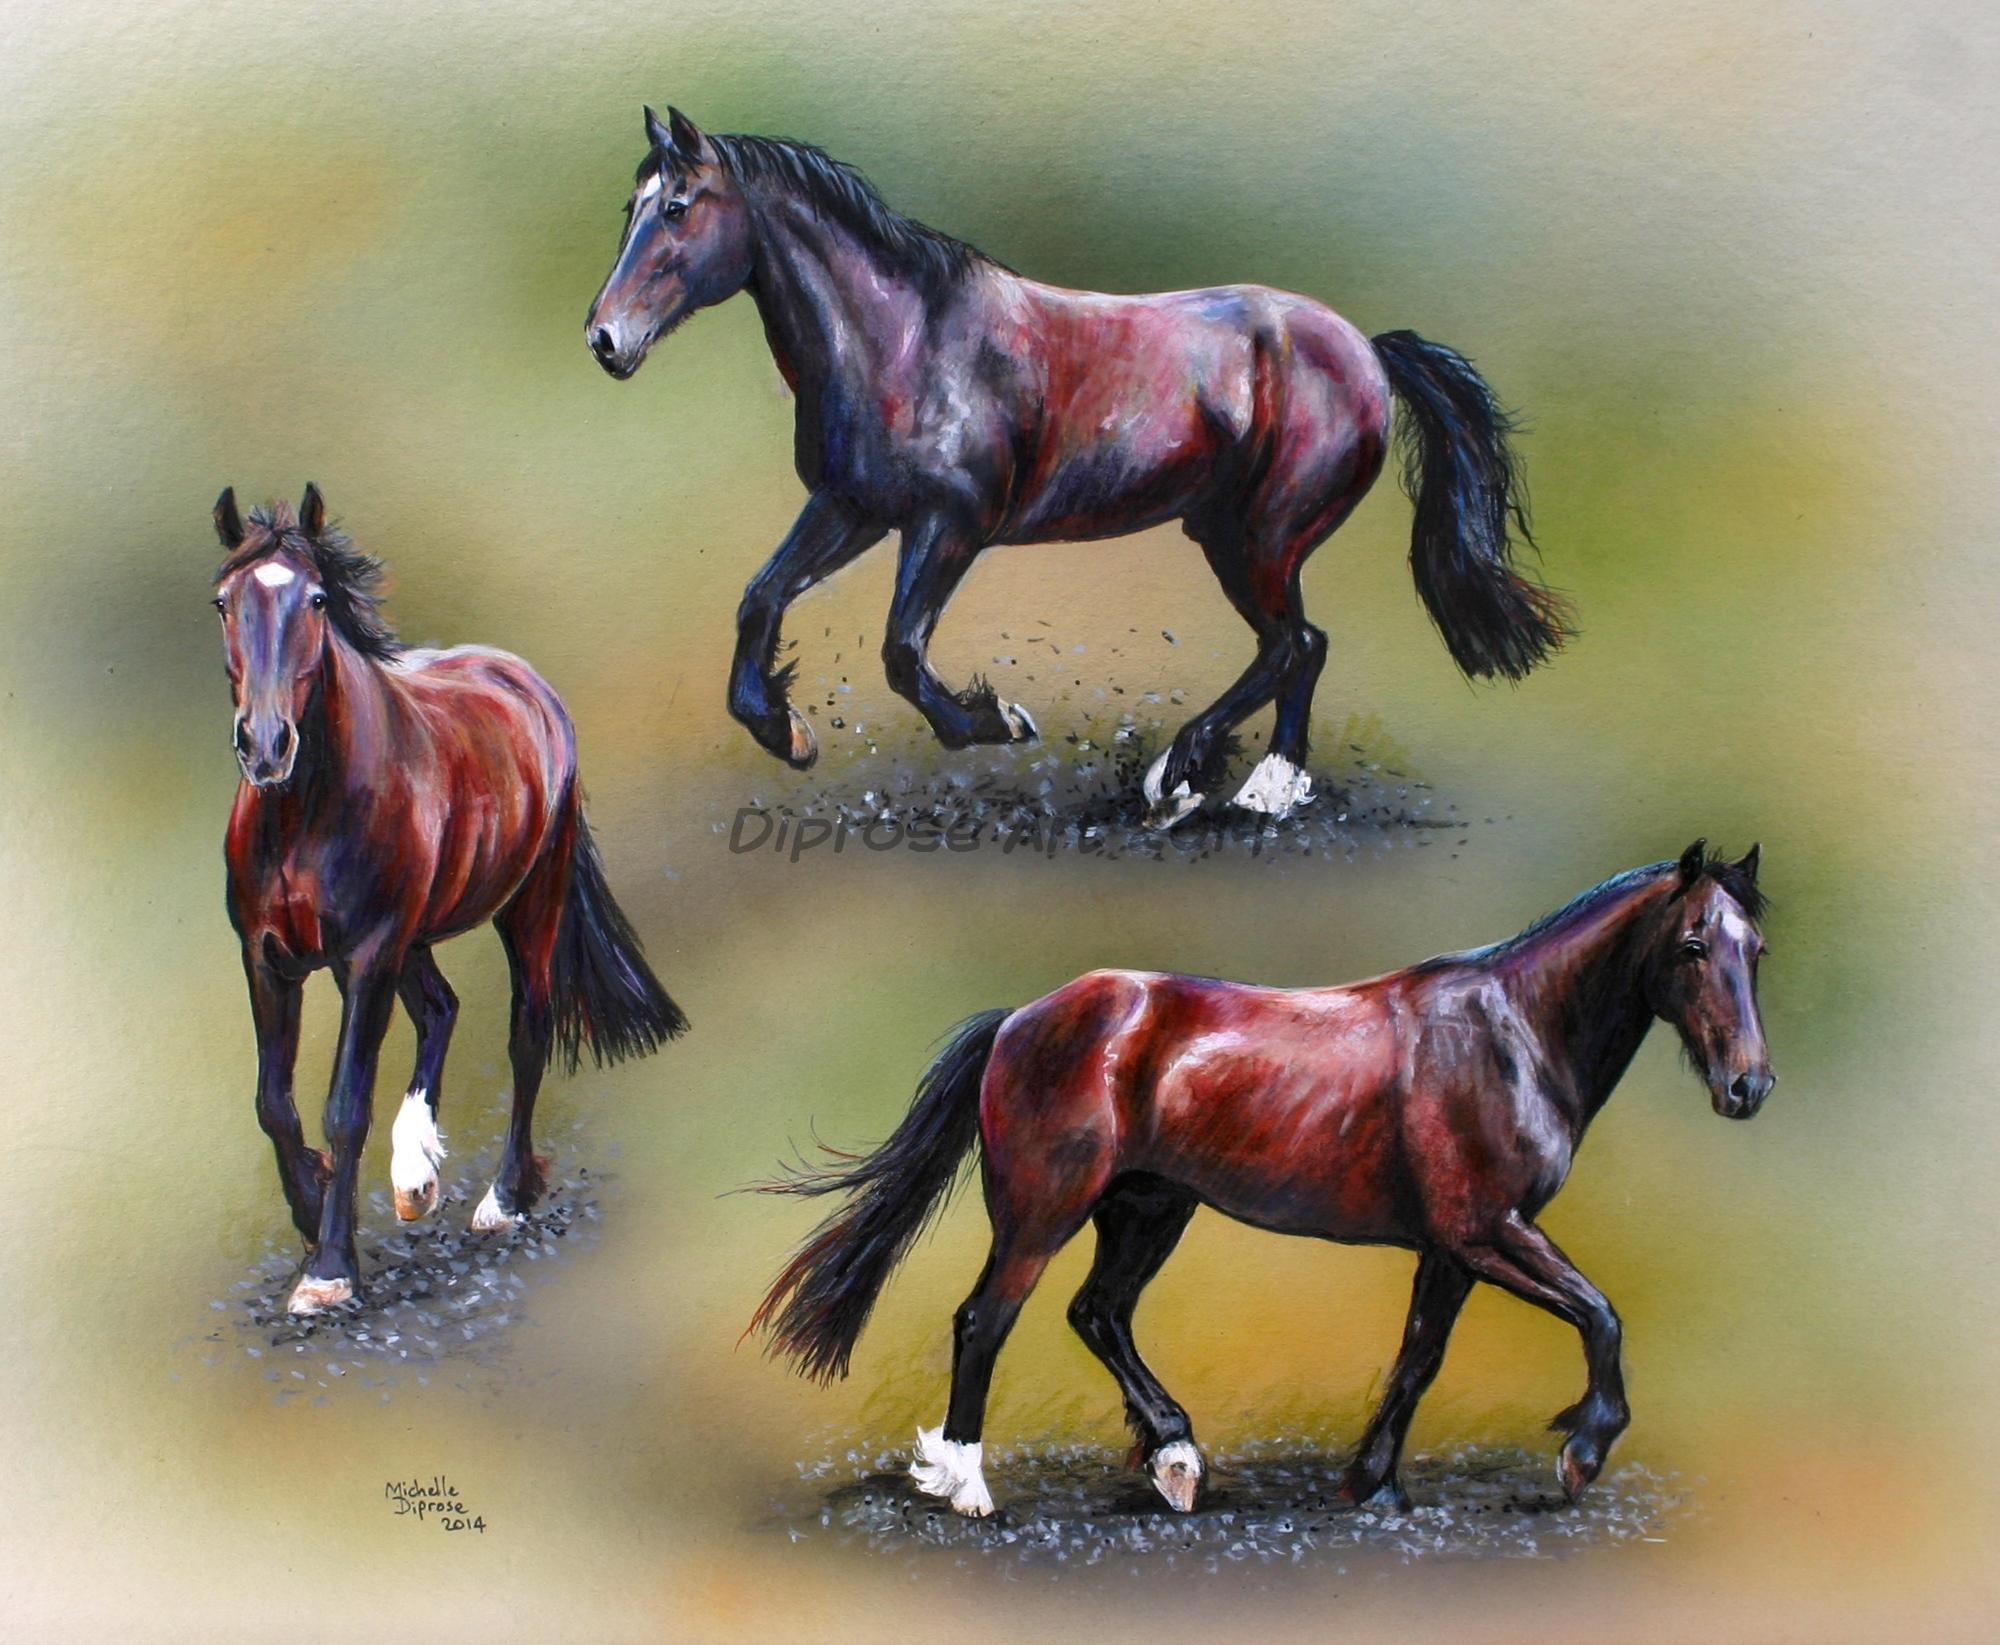 Acrylics on board - approx A3 - horse portrait - Meet Nobby - one of my most favourite horses - he is an old boy now but he still can shift if he feels like it!  And he is still in great condition. This him three ways to show off his moves.  Bless him.